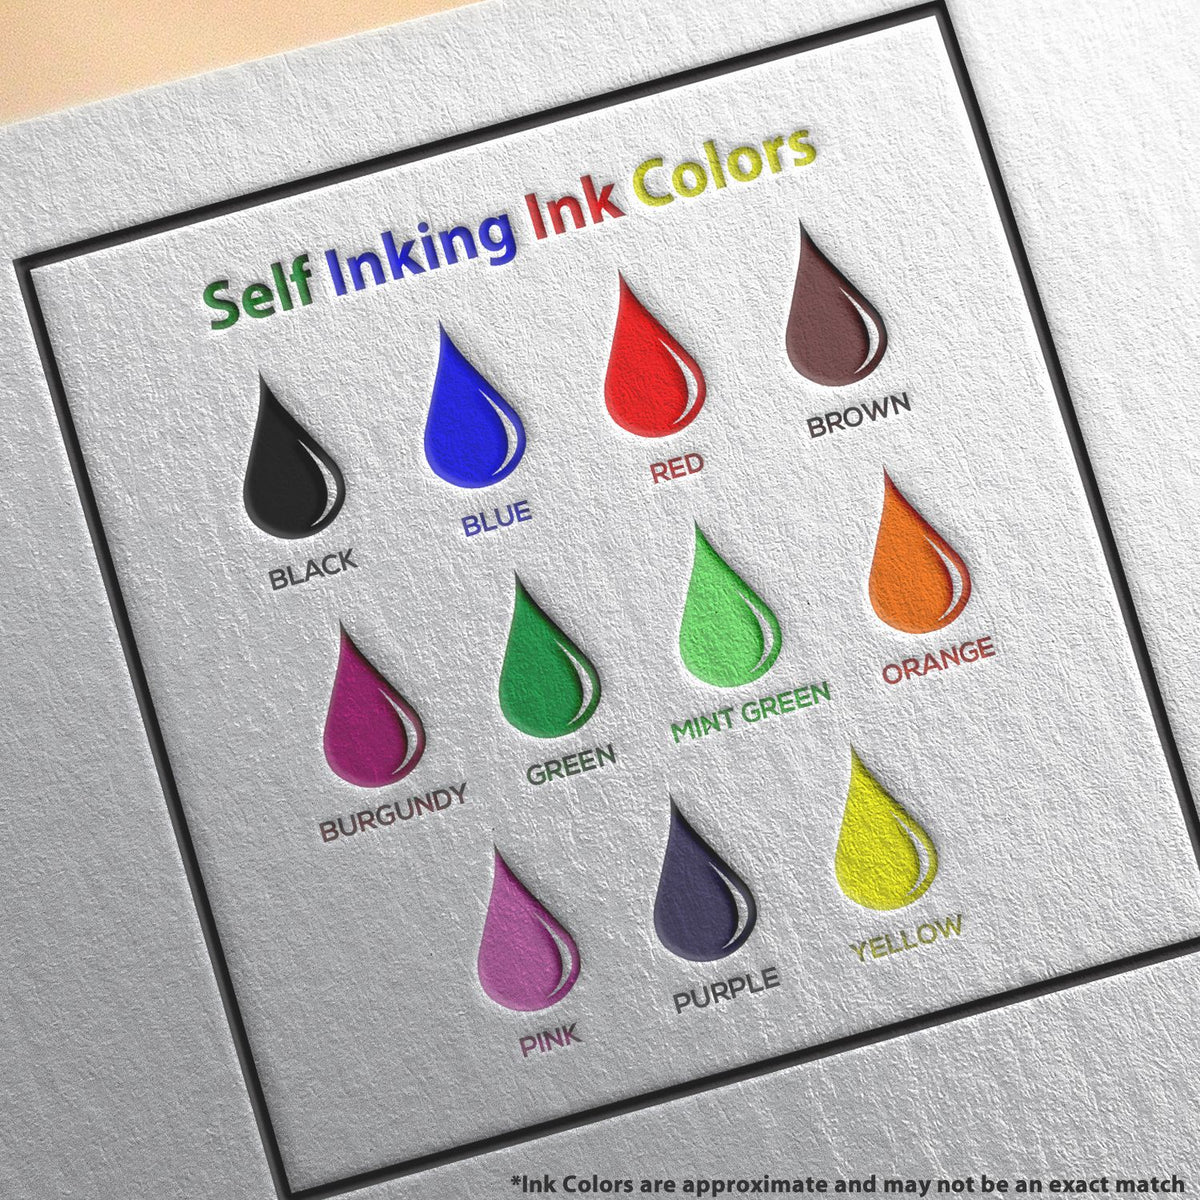 A picture showing the different ink colors or hues available for the Heavy-Duty Oklahoma Rectangular Notary Stamp product.